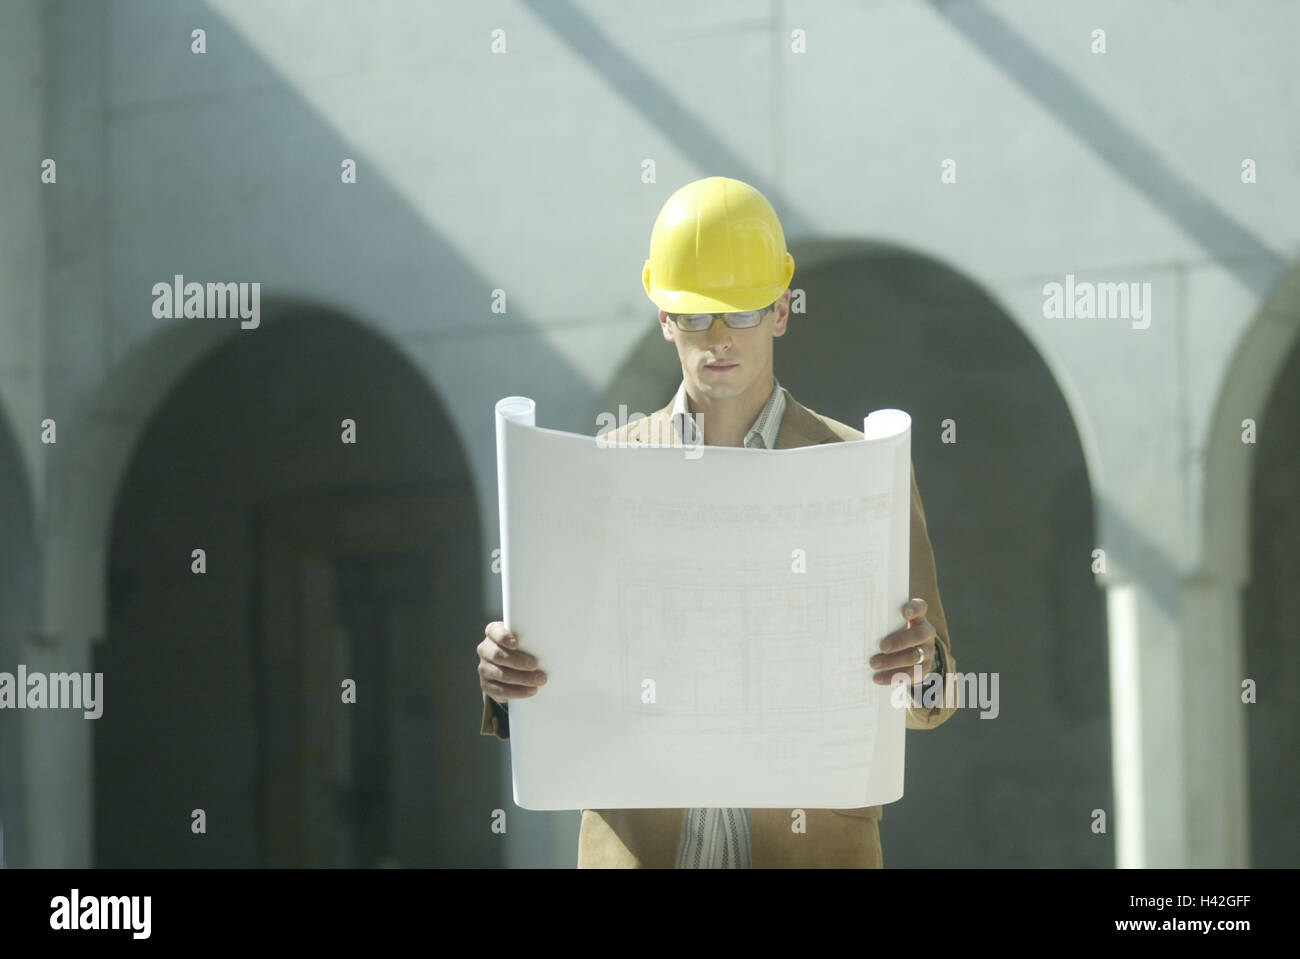 Men at work, architect, construction helmet, plan, control, construction, building of a house, man, 20-30 years, occupation, work, structural engineer, developer, safety helmet, architect's plan, site manager, construction supervision, construction supervision, monitoring, coordination, concentration, attention, curled, building industry Stock Photo